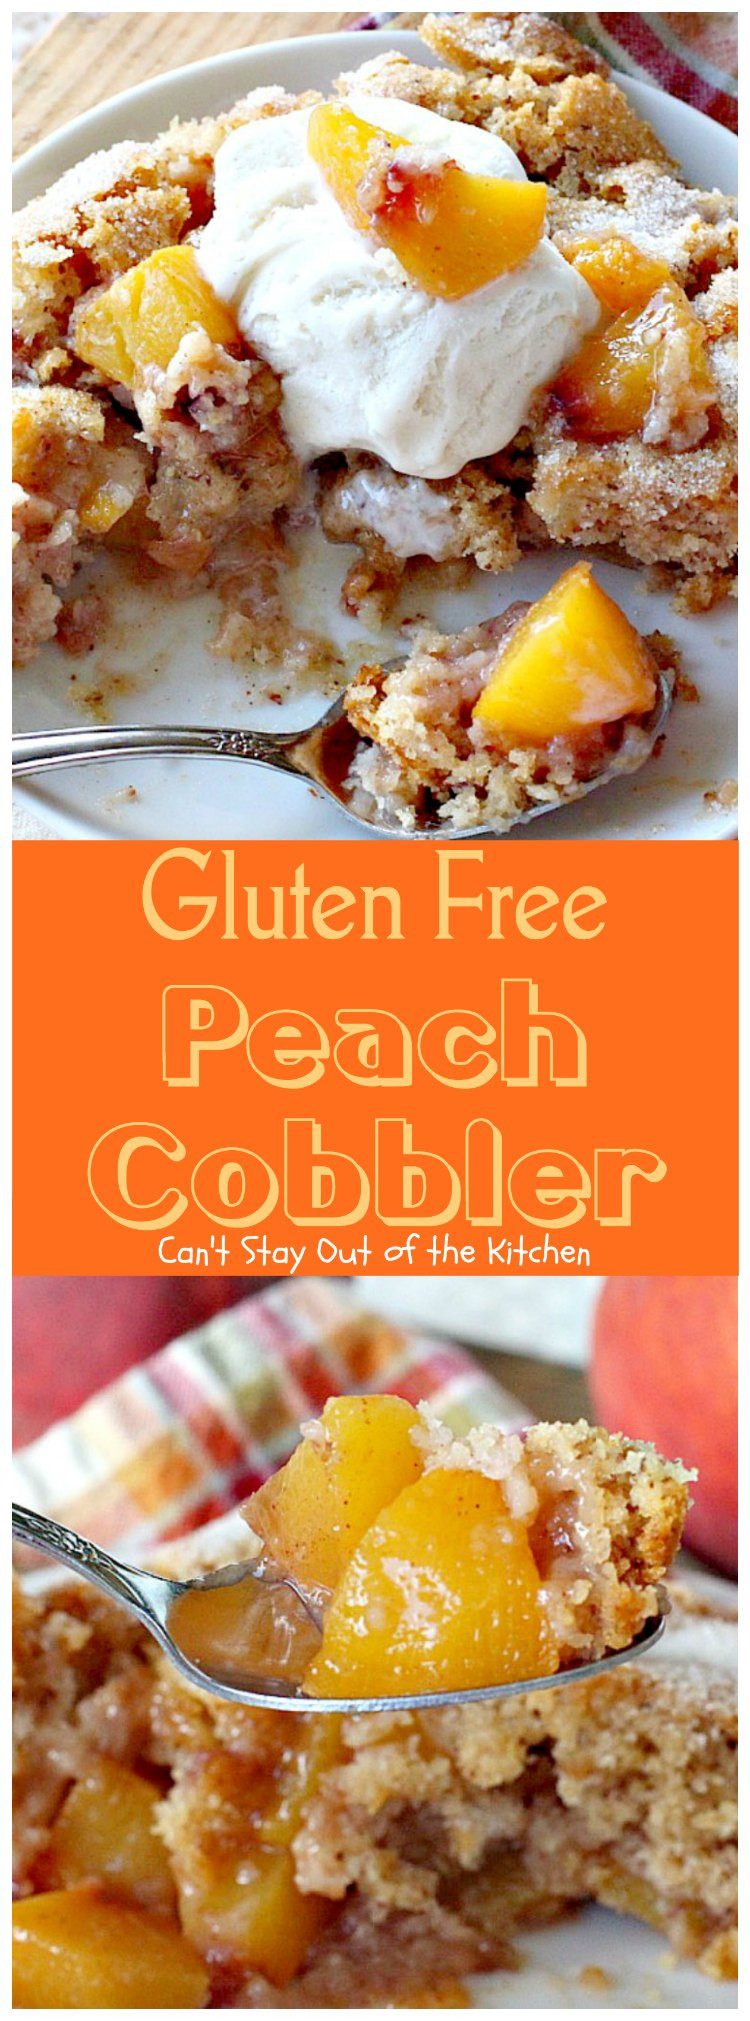 Gluten Free Cobbler
 Gluten Free Peach Cobbler Can t Stay Out of the Kitchen